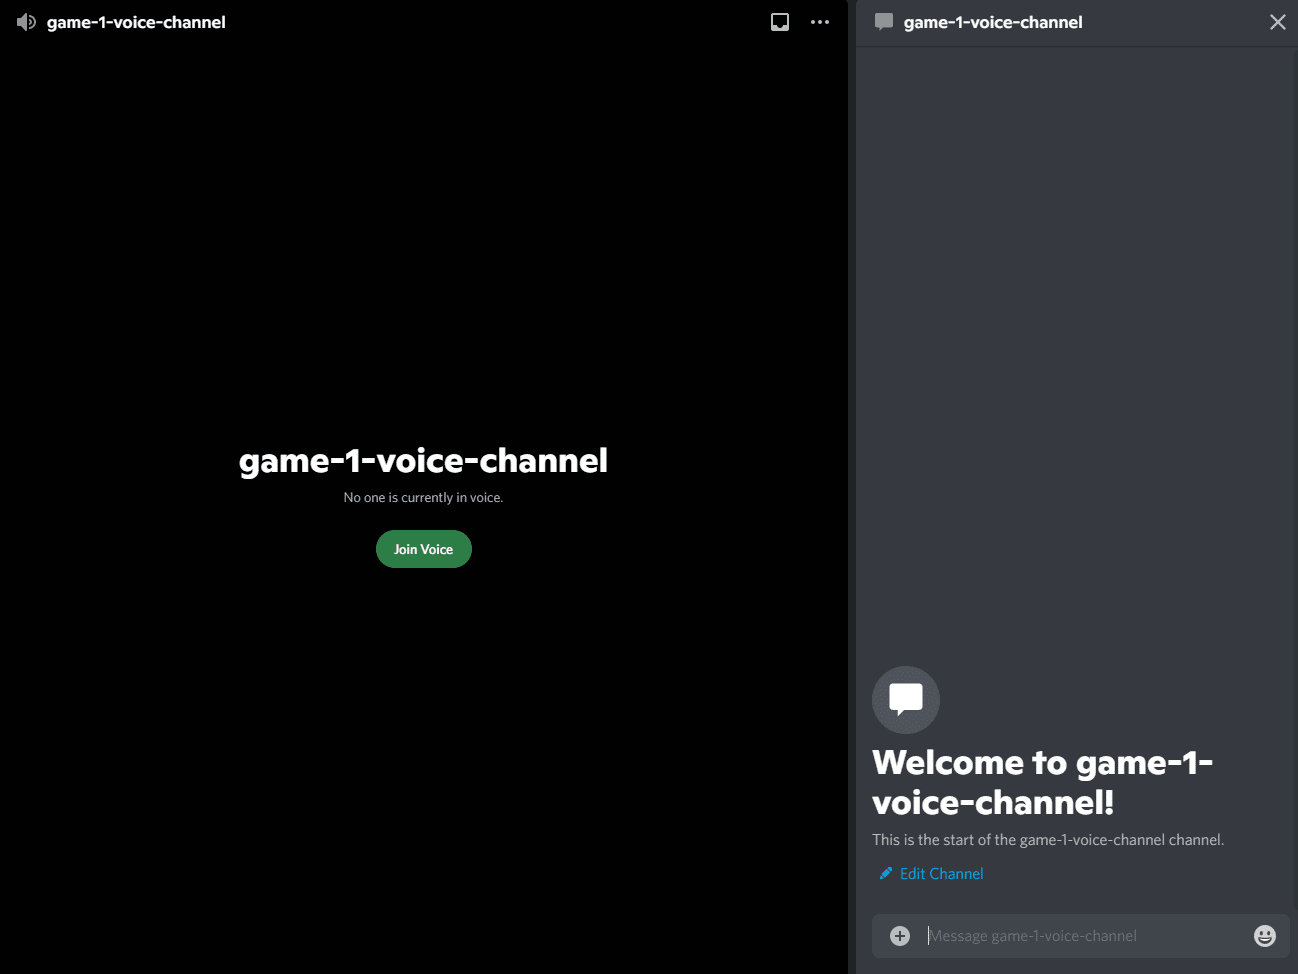 discord voice channel